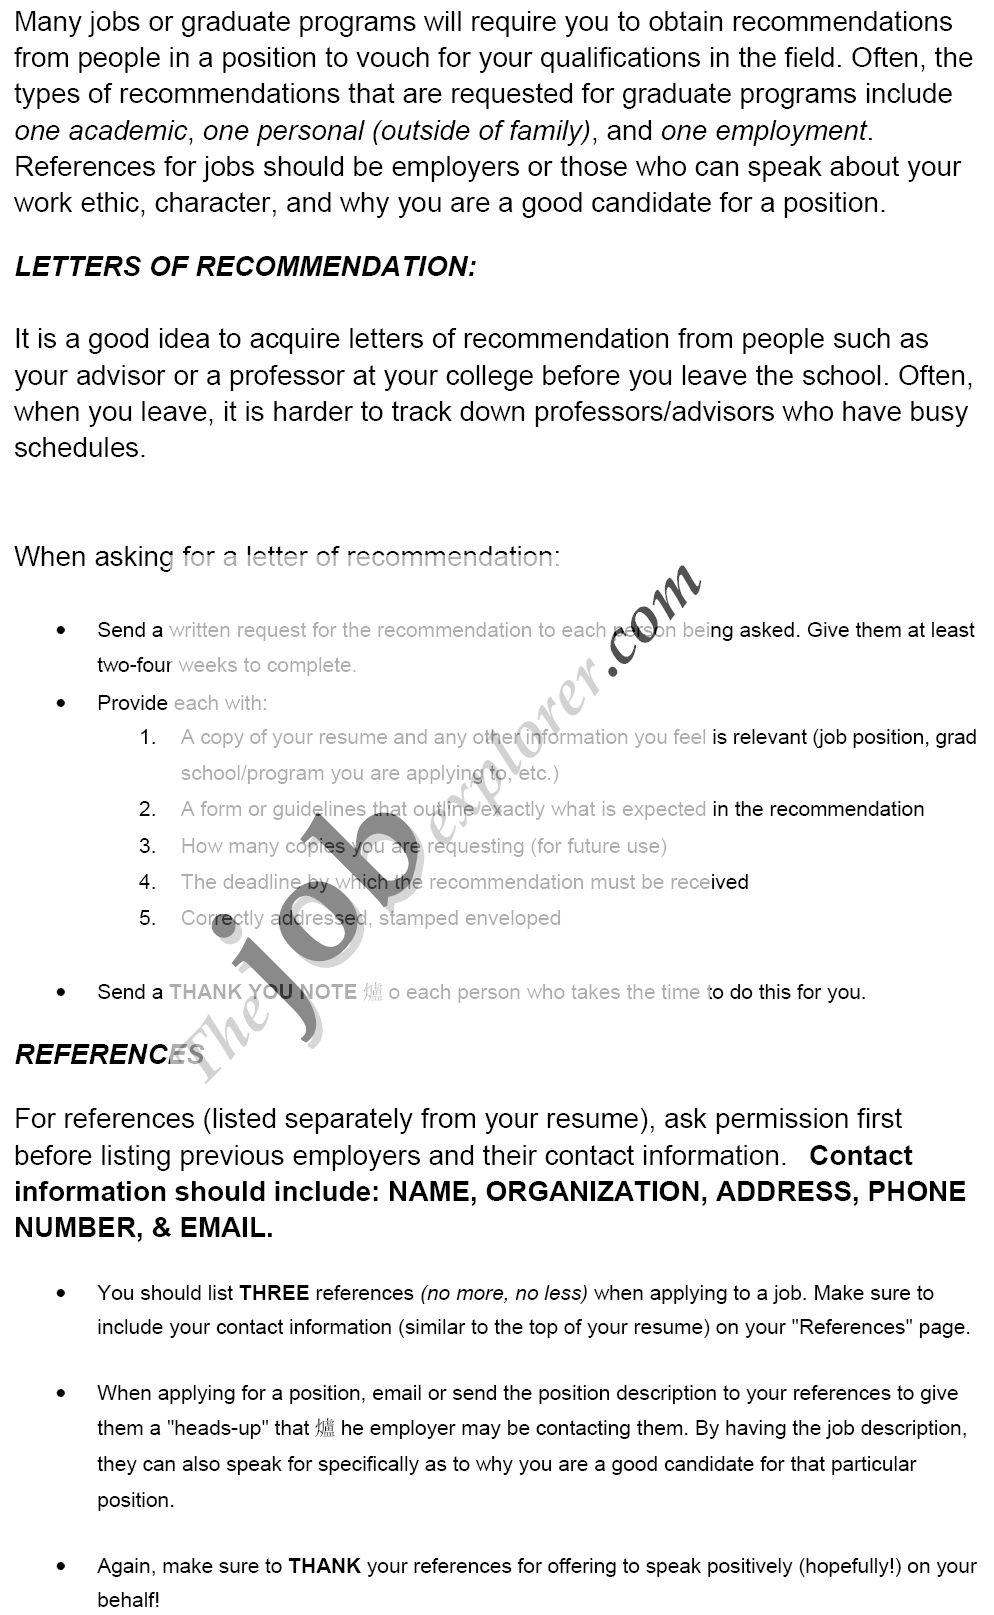 Template For Writing A Letter Of Recommendation from www.thejobexplorer.com